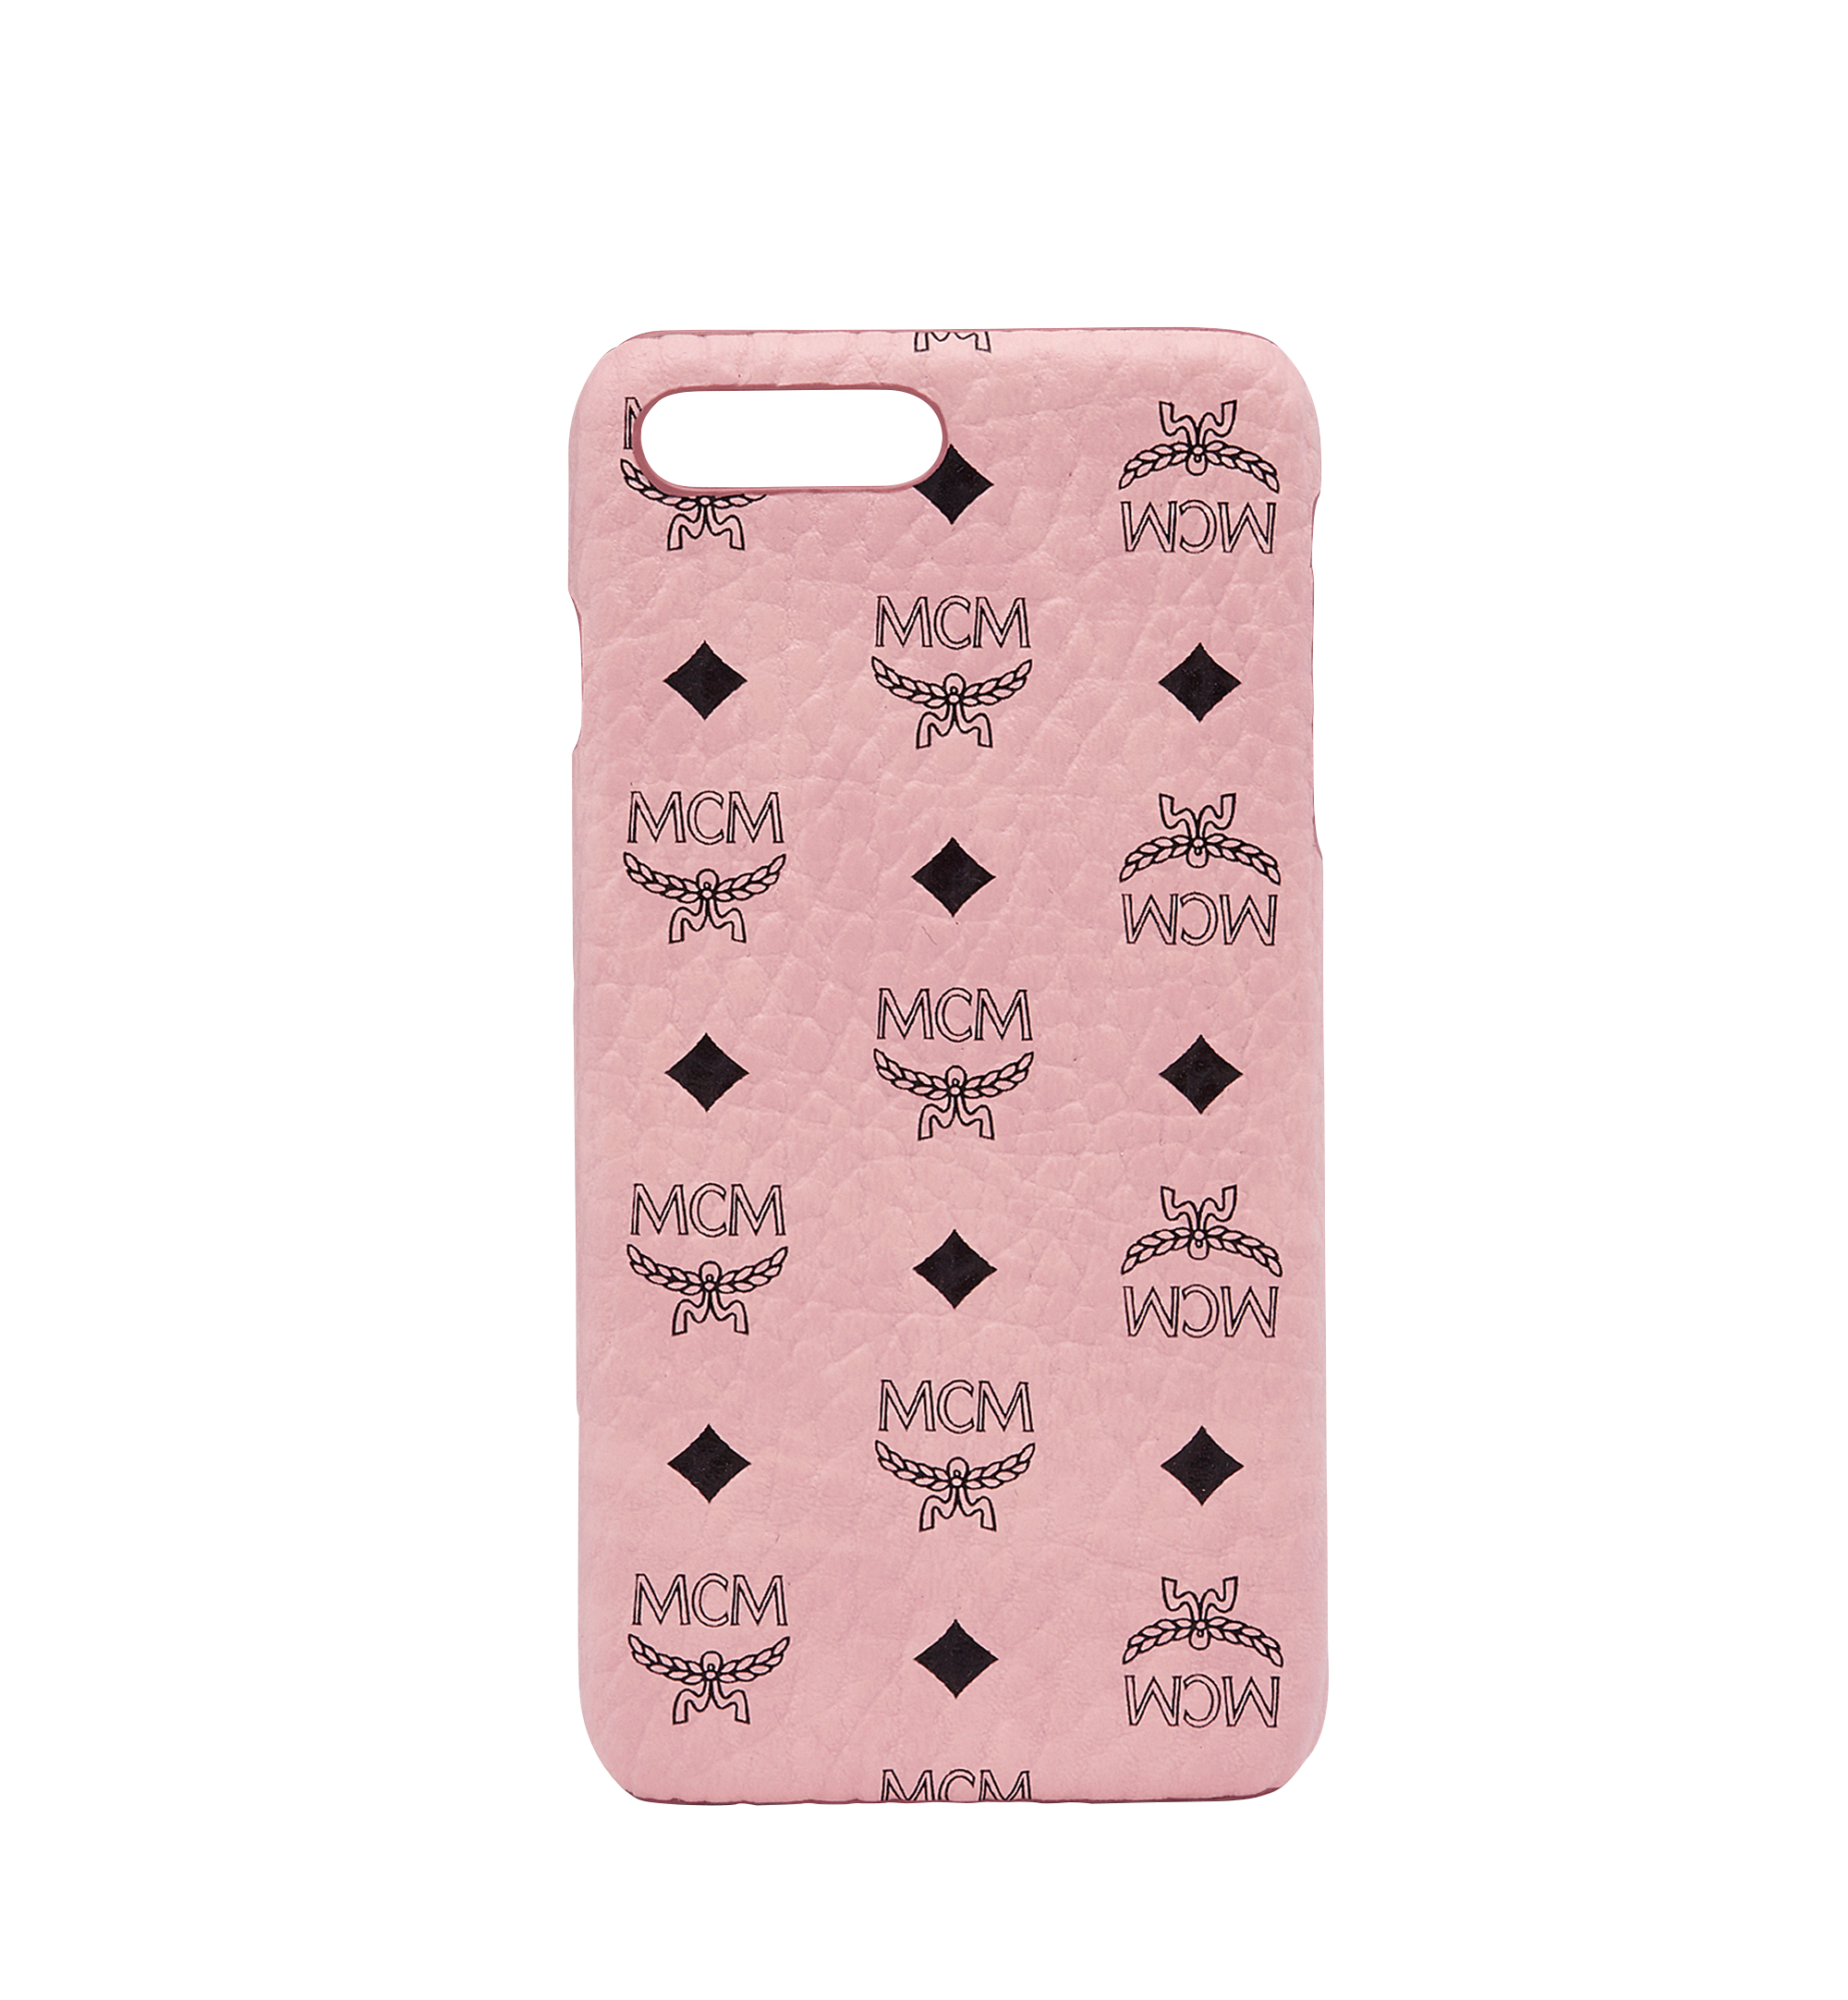 One Size モノグラム iPhone 6S/7/8 Plus ケース SOFT PINK | MCM ®JP